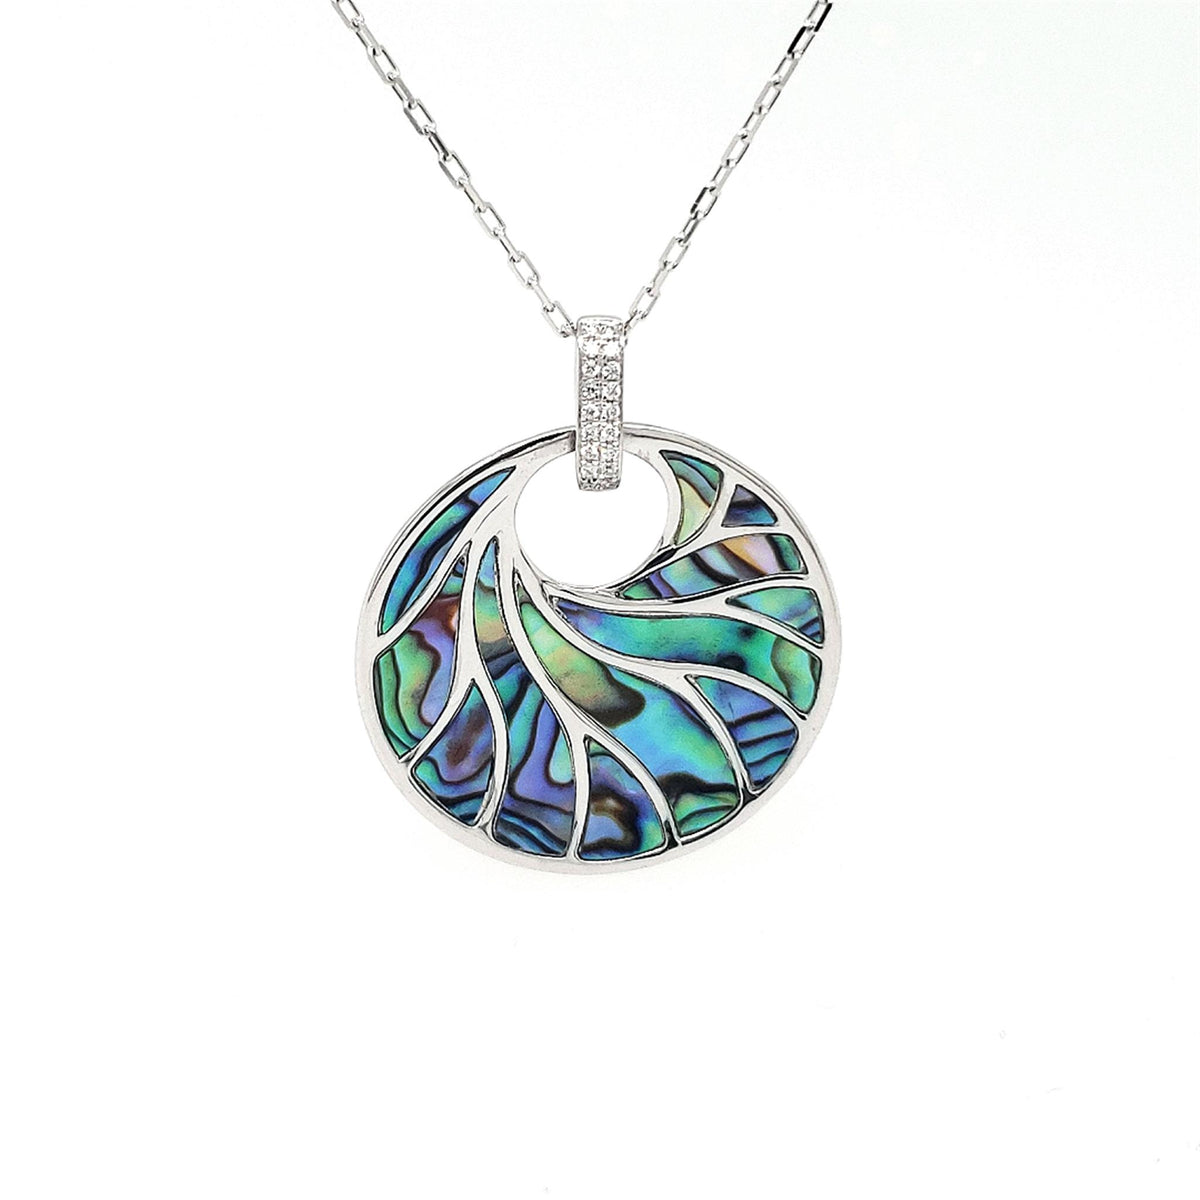 Frederic Sage 14Kt White Gold Round Venus Pendant With Abalone Inlay